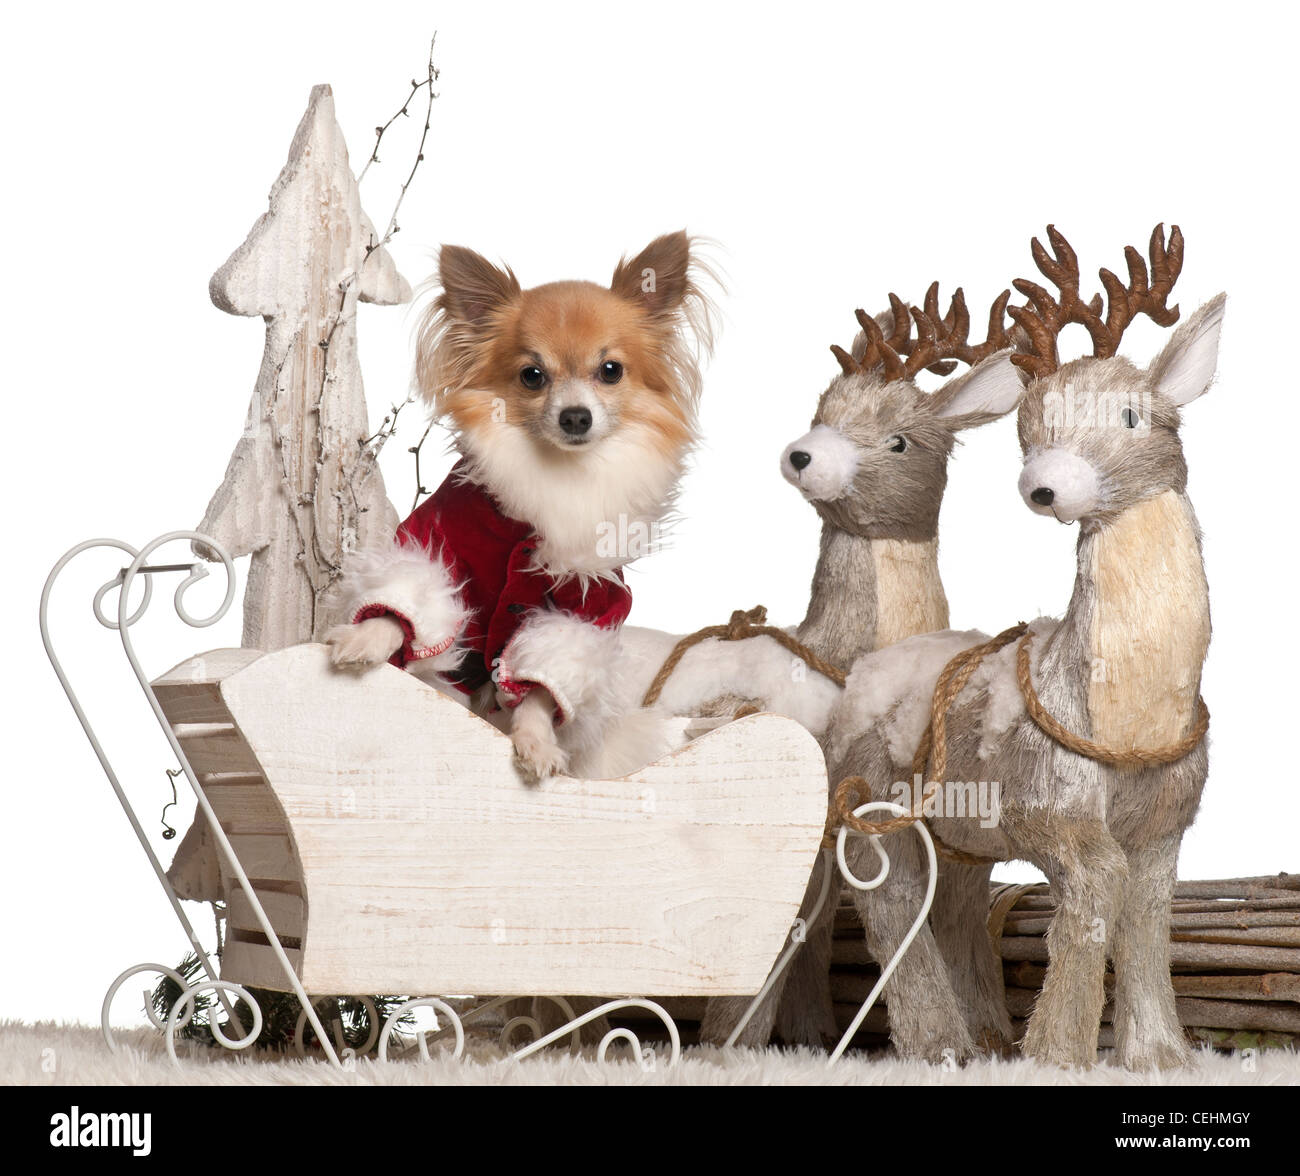 Chihuahua, 5 years old, in Christmas sleigh in front of white background Stock Photo